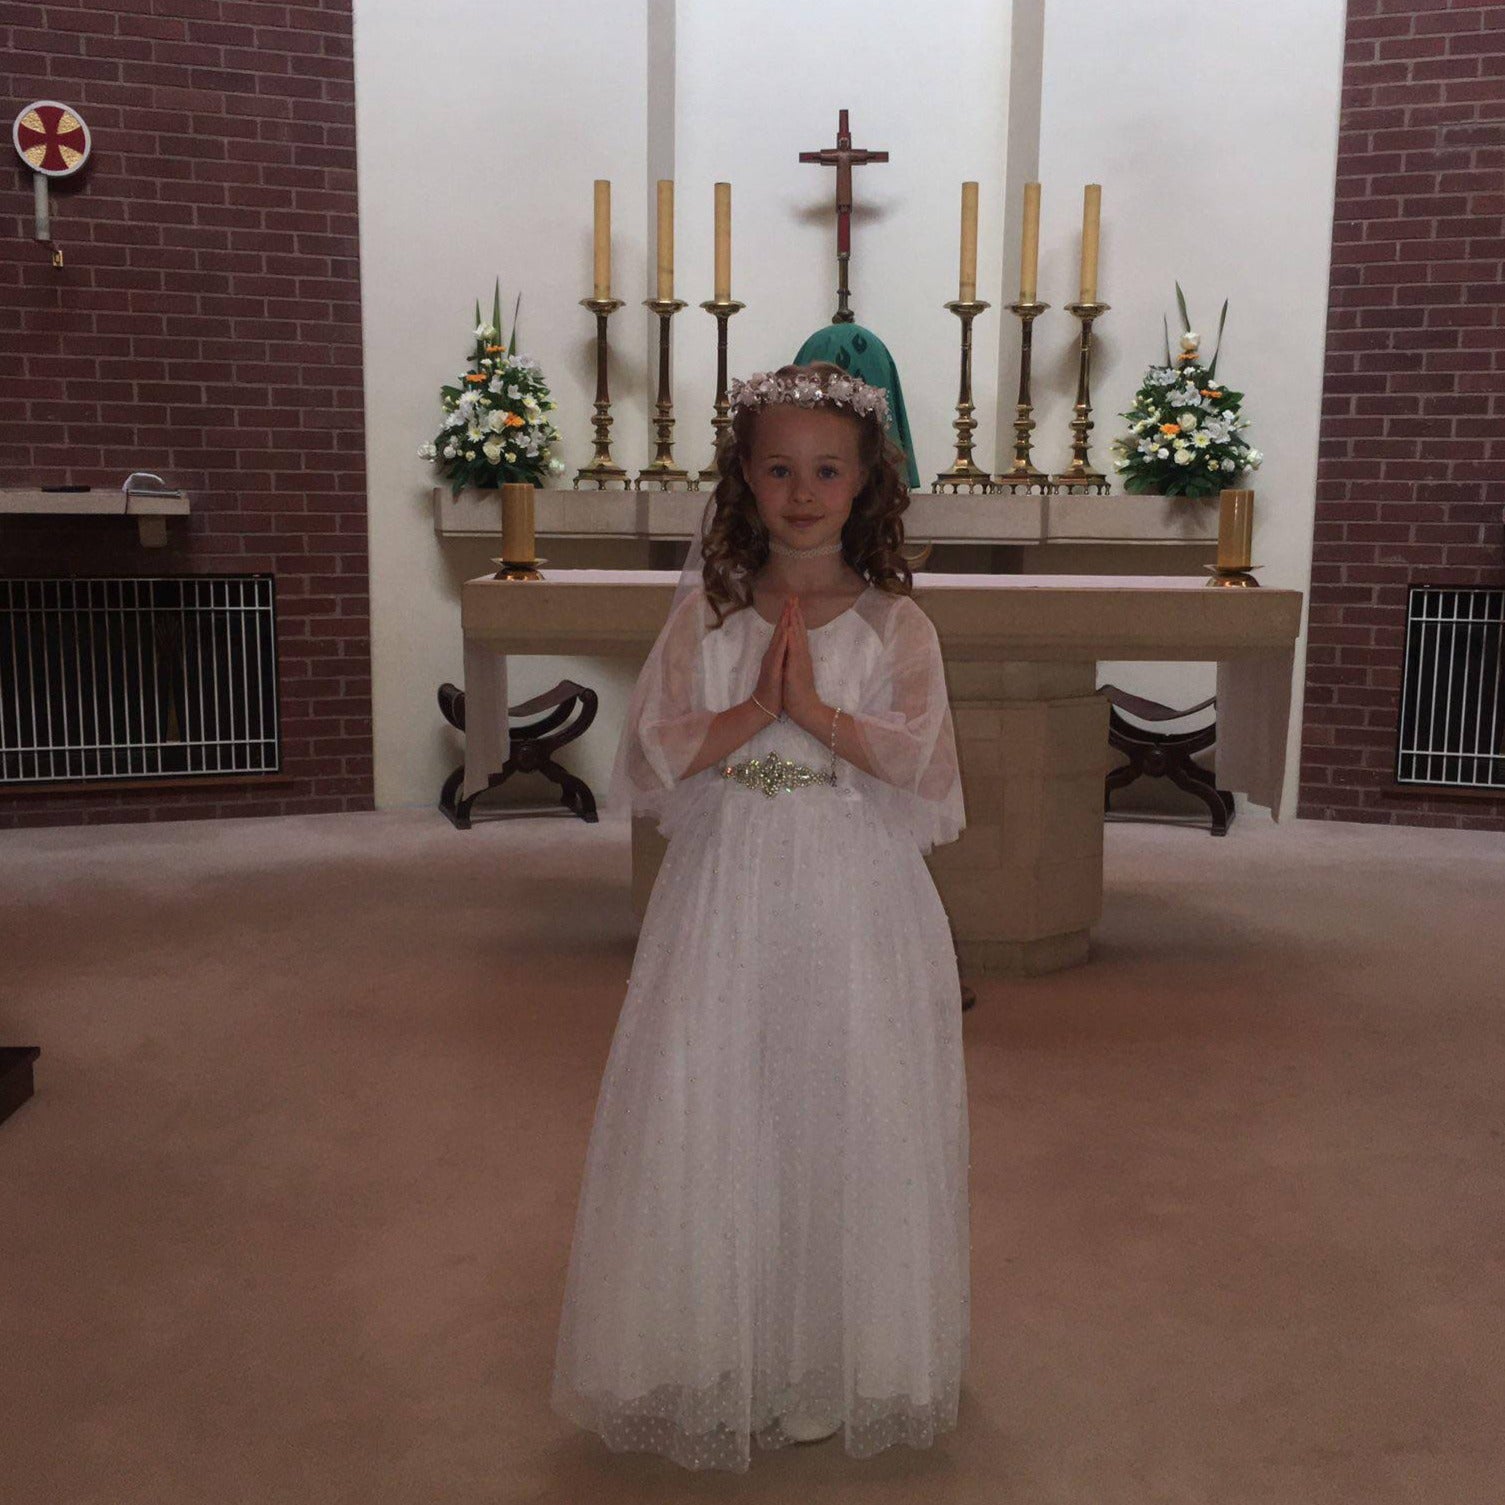 Young girl at communion